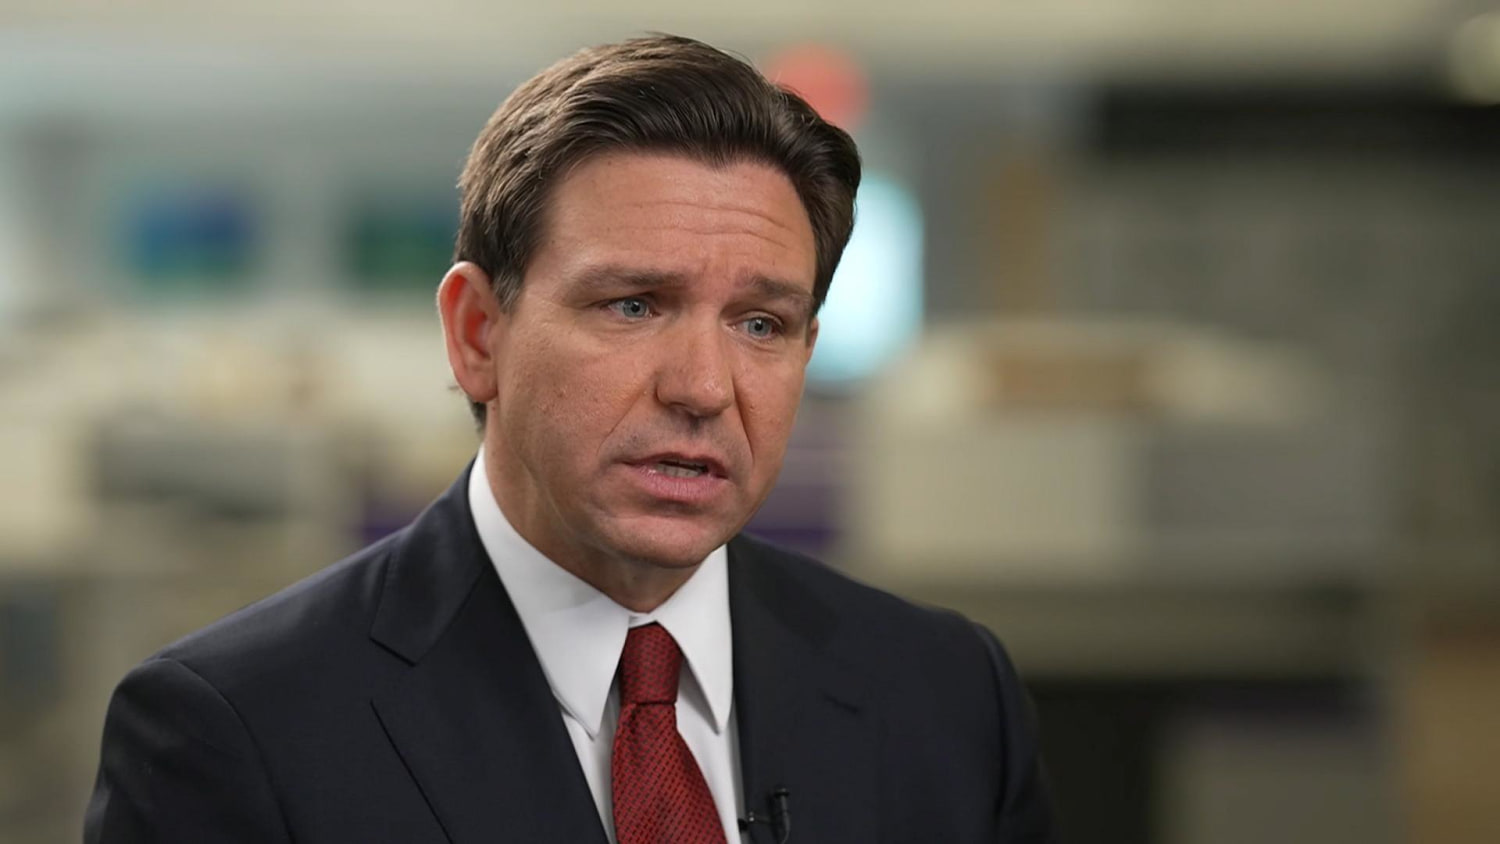 Ron DeSantis offers support after Iowa shooting, wouldn't back policy changes on gun violence